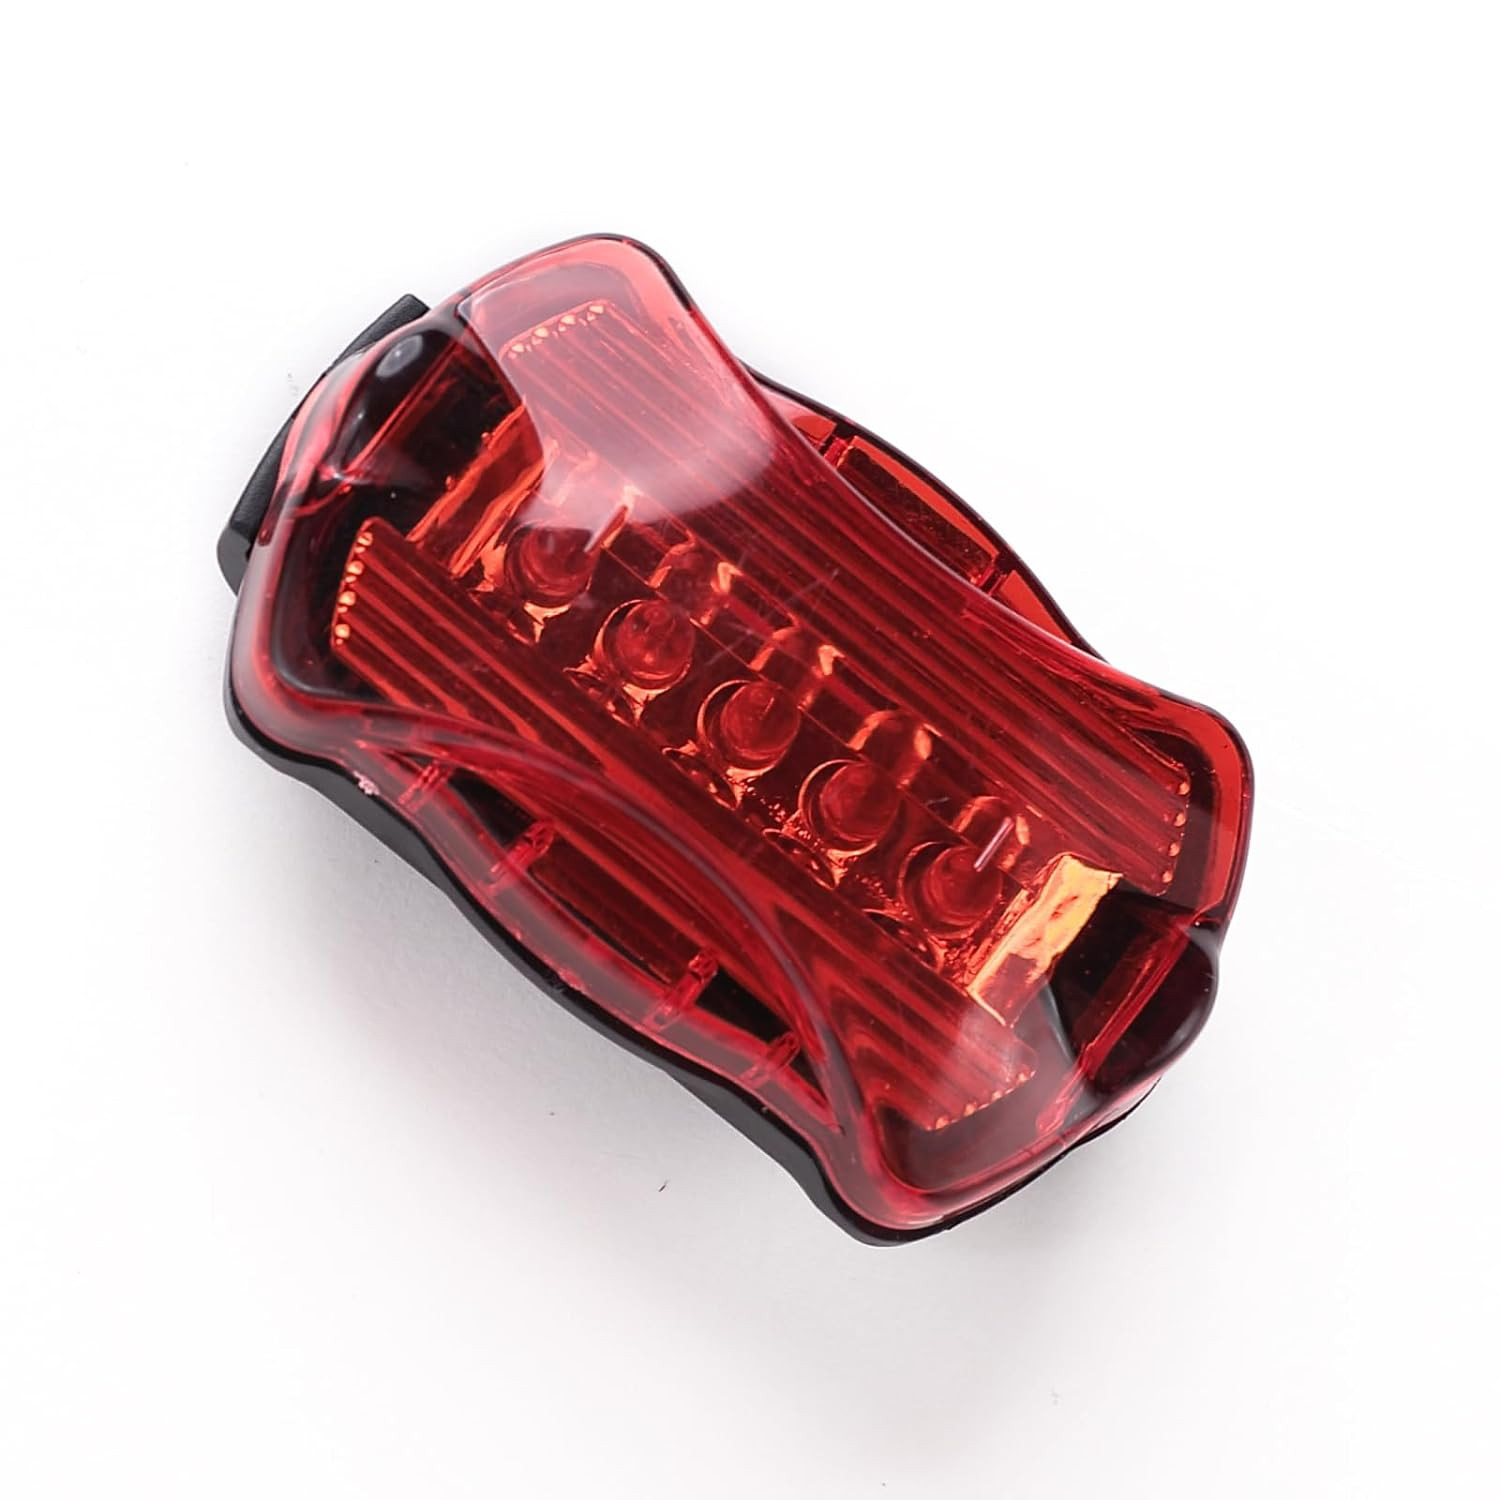 Kuber Industries Cycling Safety Lights|Bicycle Light Battery Powered|Fits On Any Road Bikes (Red & Black)